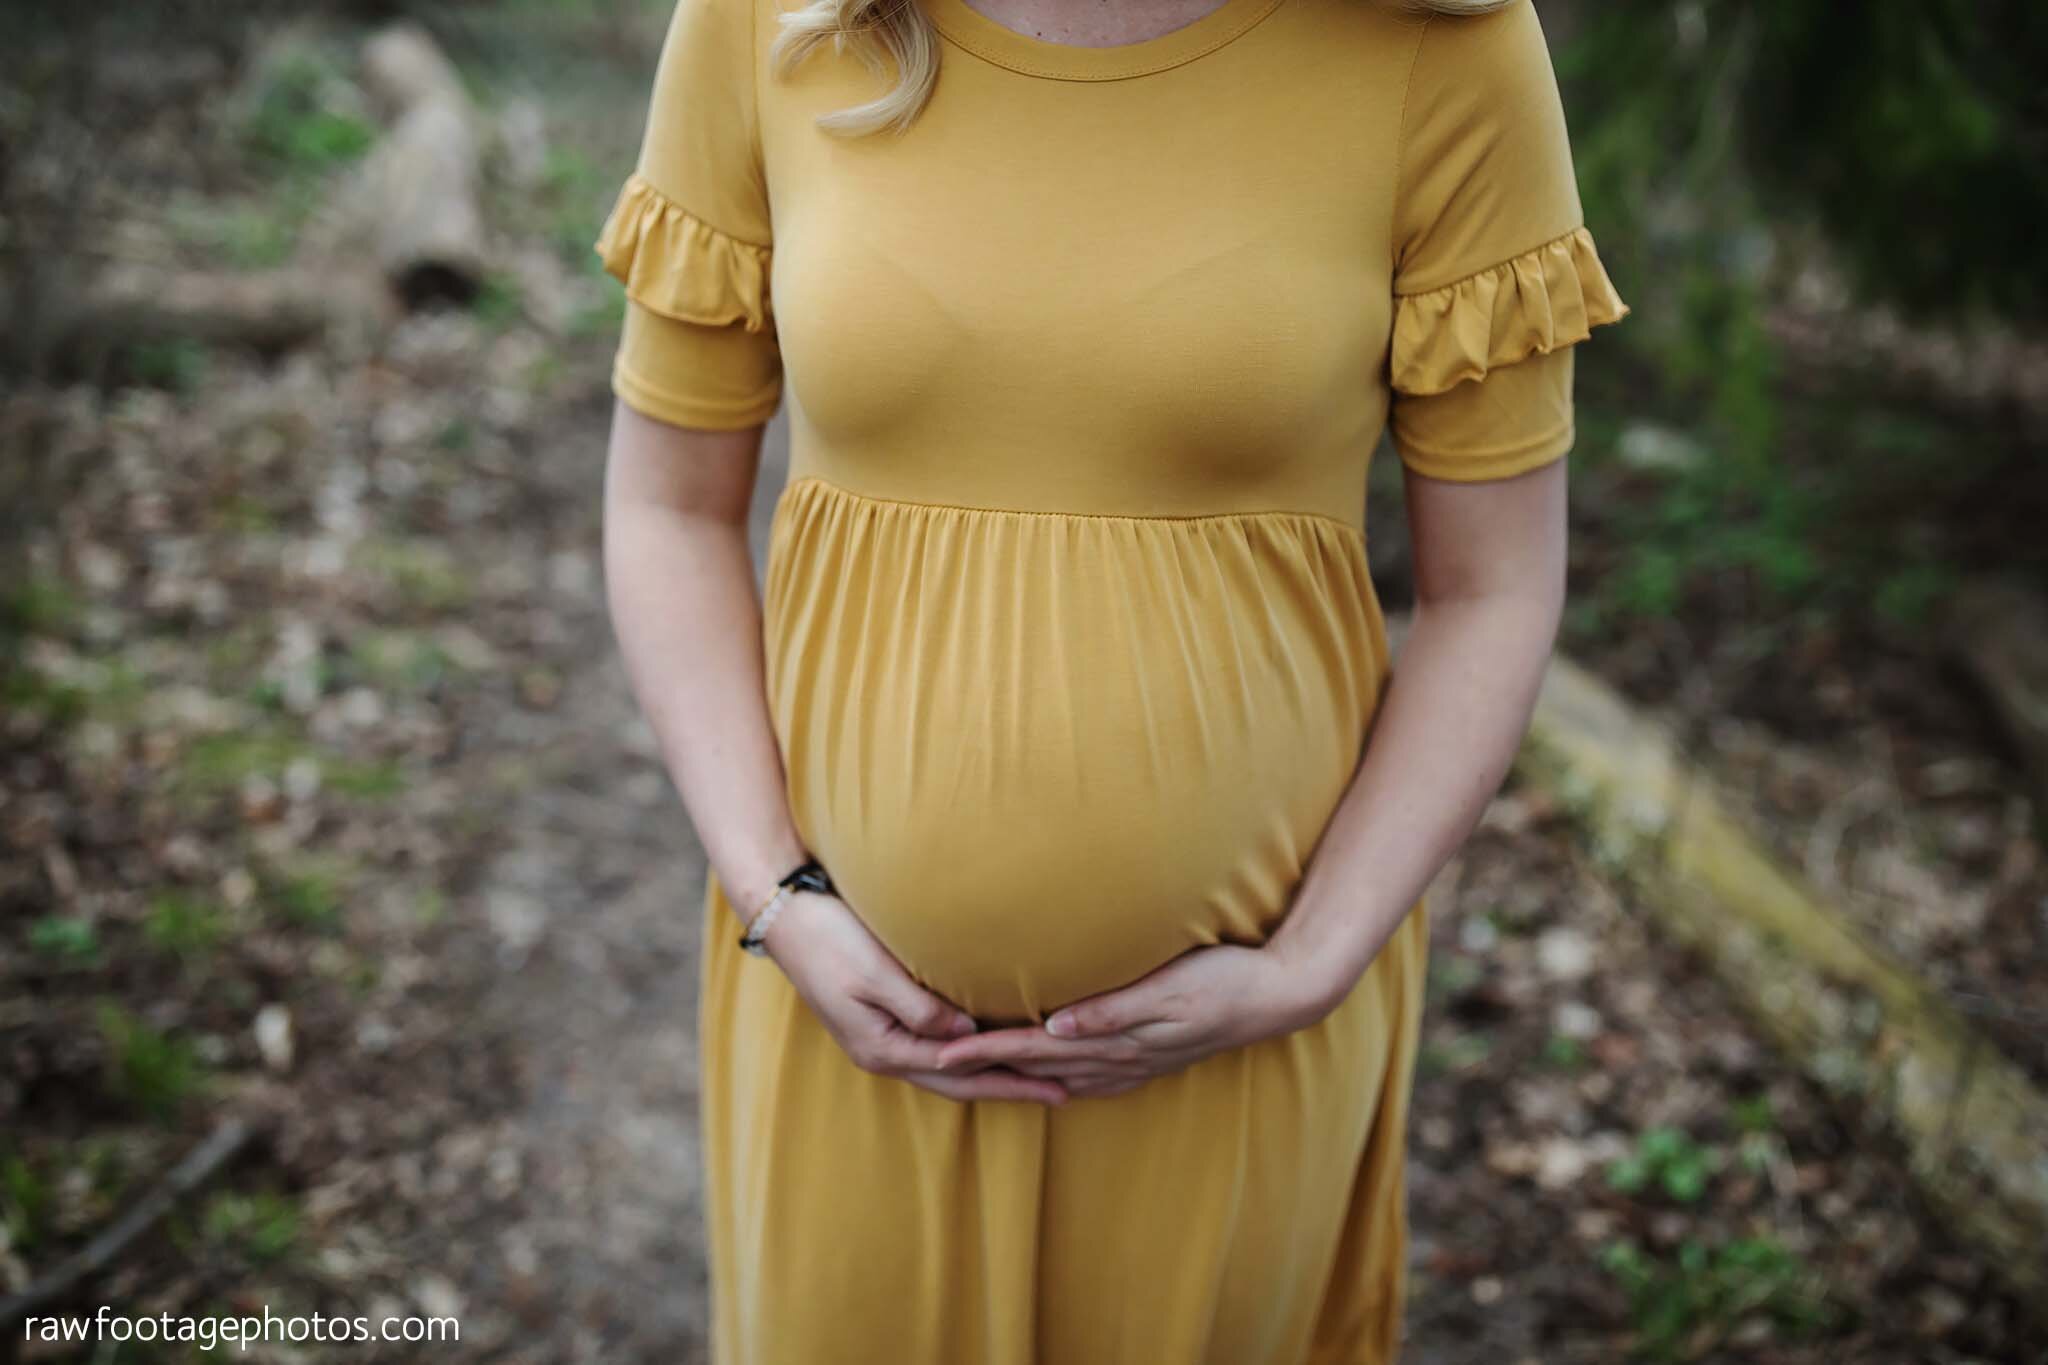 london_ontario_maternity_photographer-raw_footage_photography-in_home_lifestyle_maternity-forest_maternity_session-yellow_maternity_dress_033.jpg